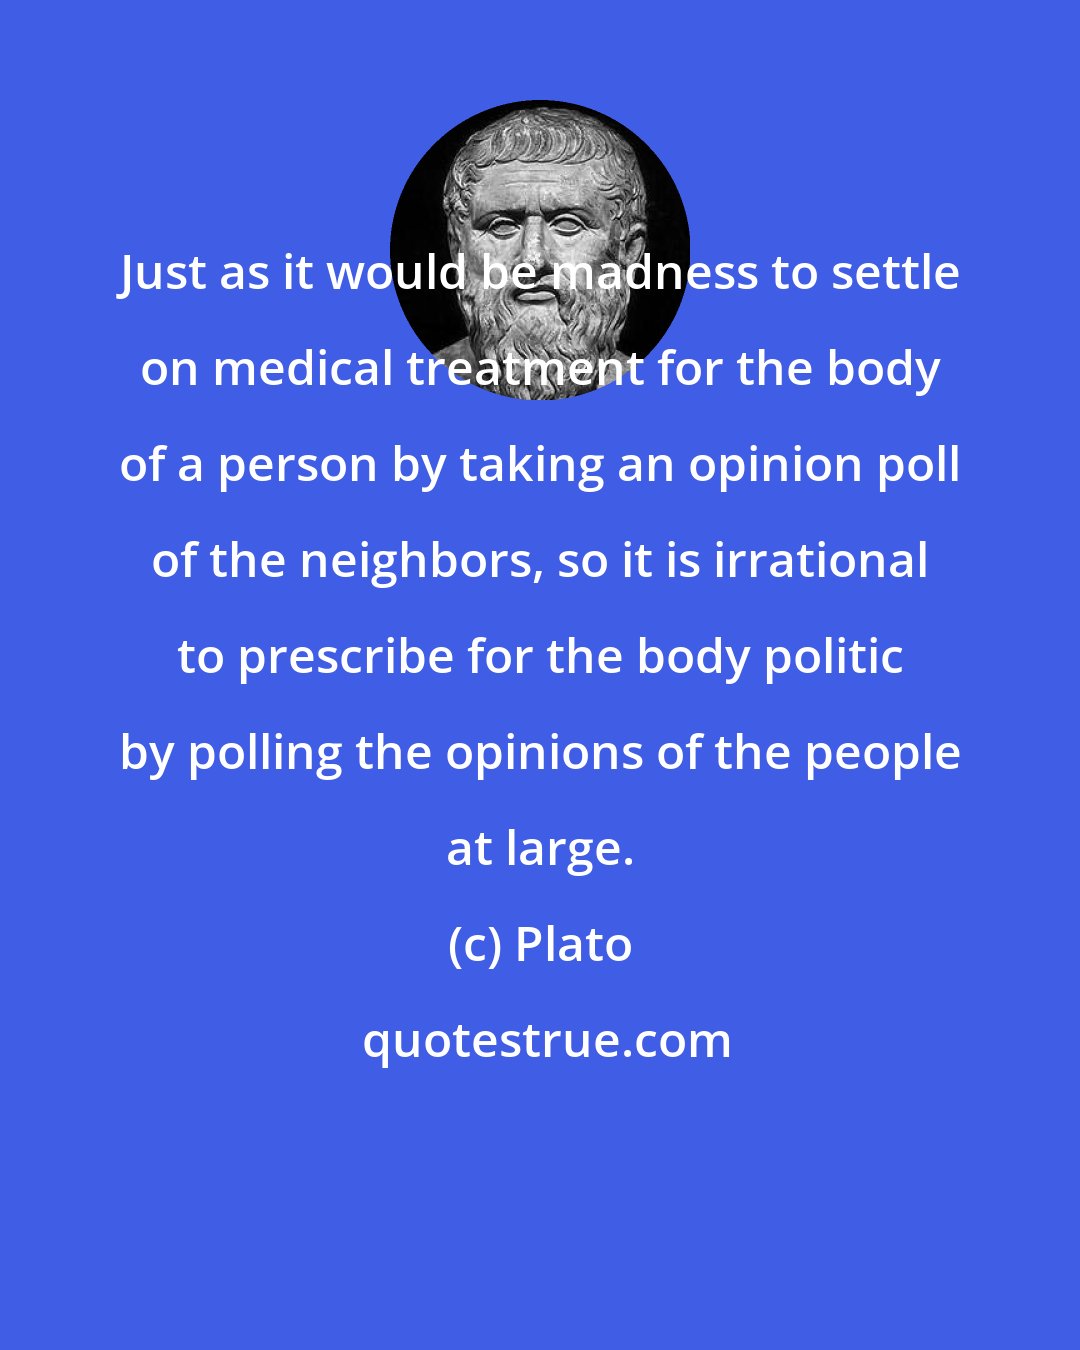 Plato: Just as it would be madness to settle on medical treatment for the body of a person by taking an opinion poll of the neighbors, so it is irrational to prescribe for the body politic by polling the opinions of the people at large.